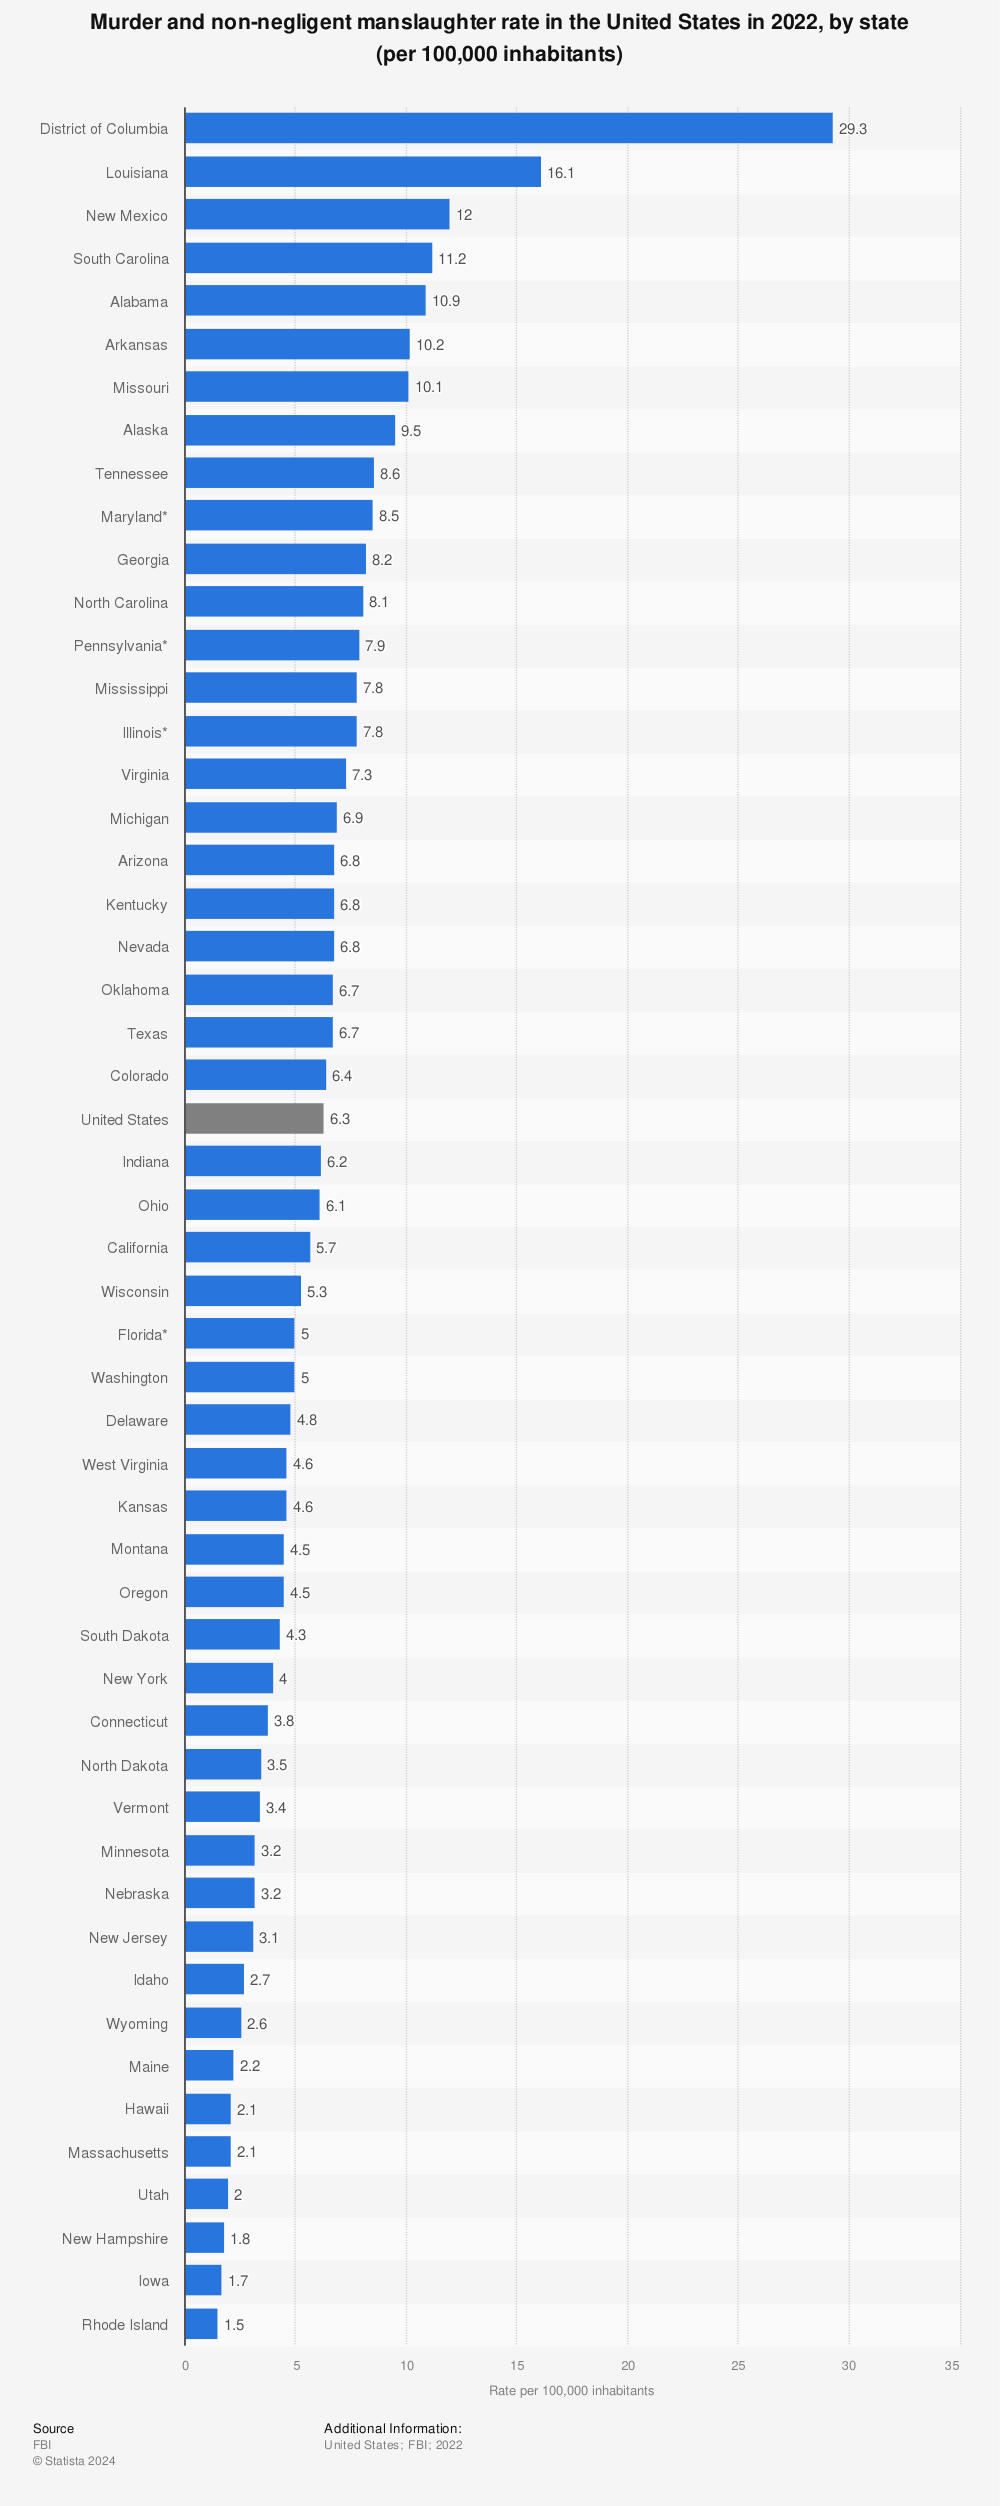 Statistic: Murder and non-negligent manslaughter rate in the United States in 2022, by state (per 100,000 inhabitants) | Statista